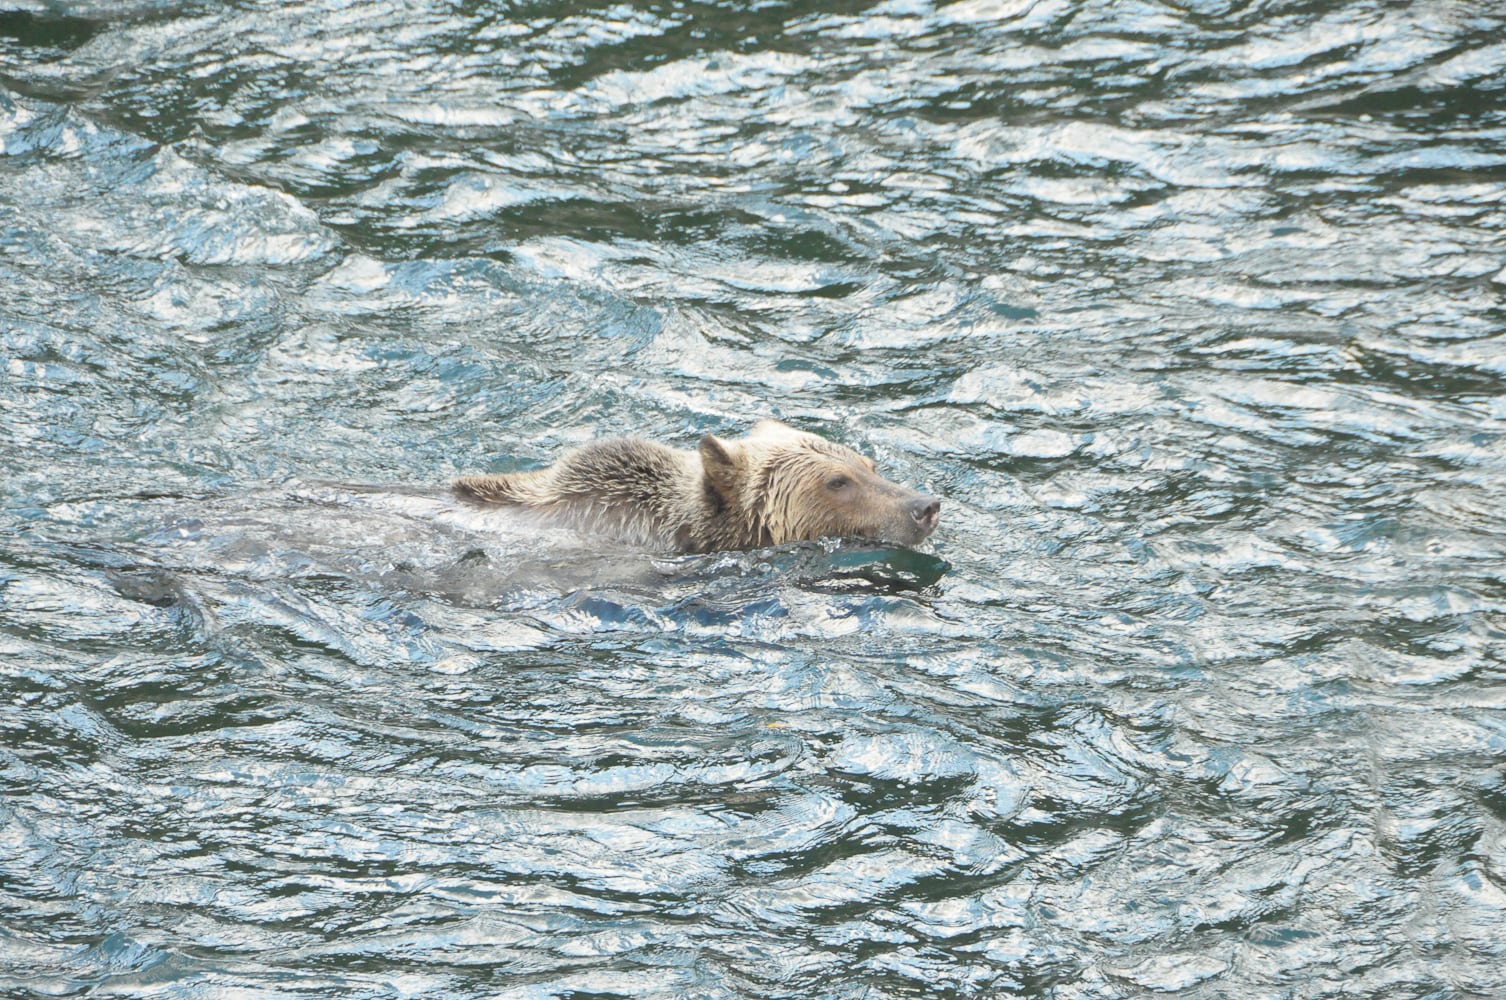 A grizzly bear swimming at Wild Bear Lodge